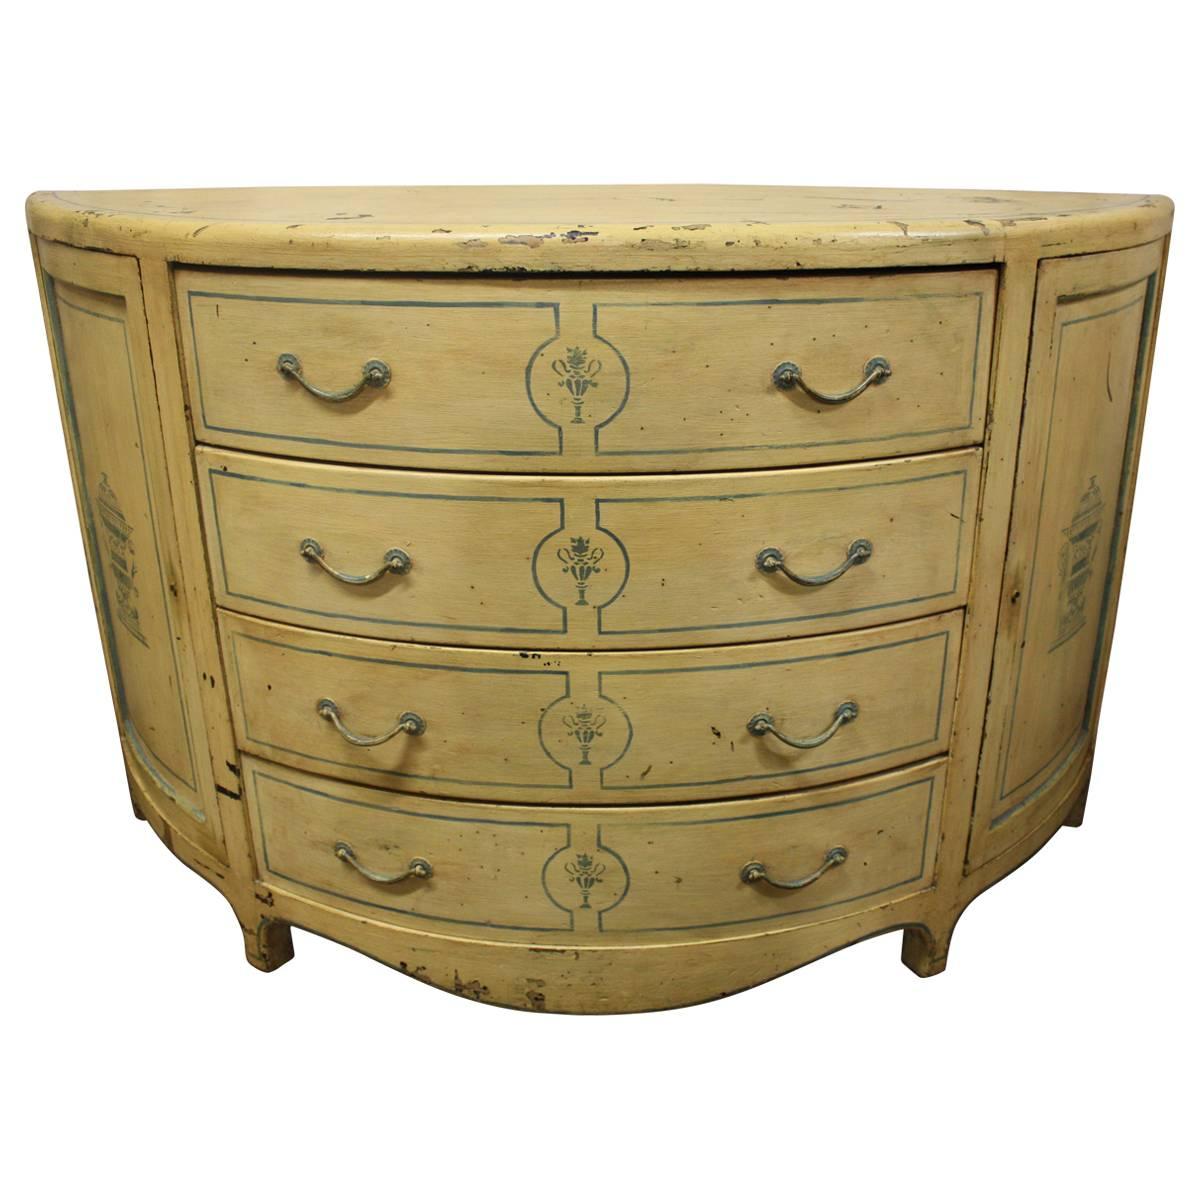 Charming Early 20th Century Half-Moon Chest